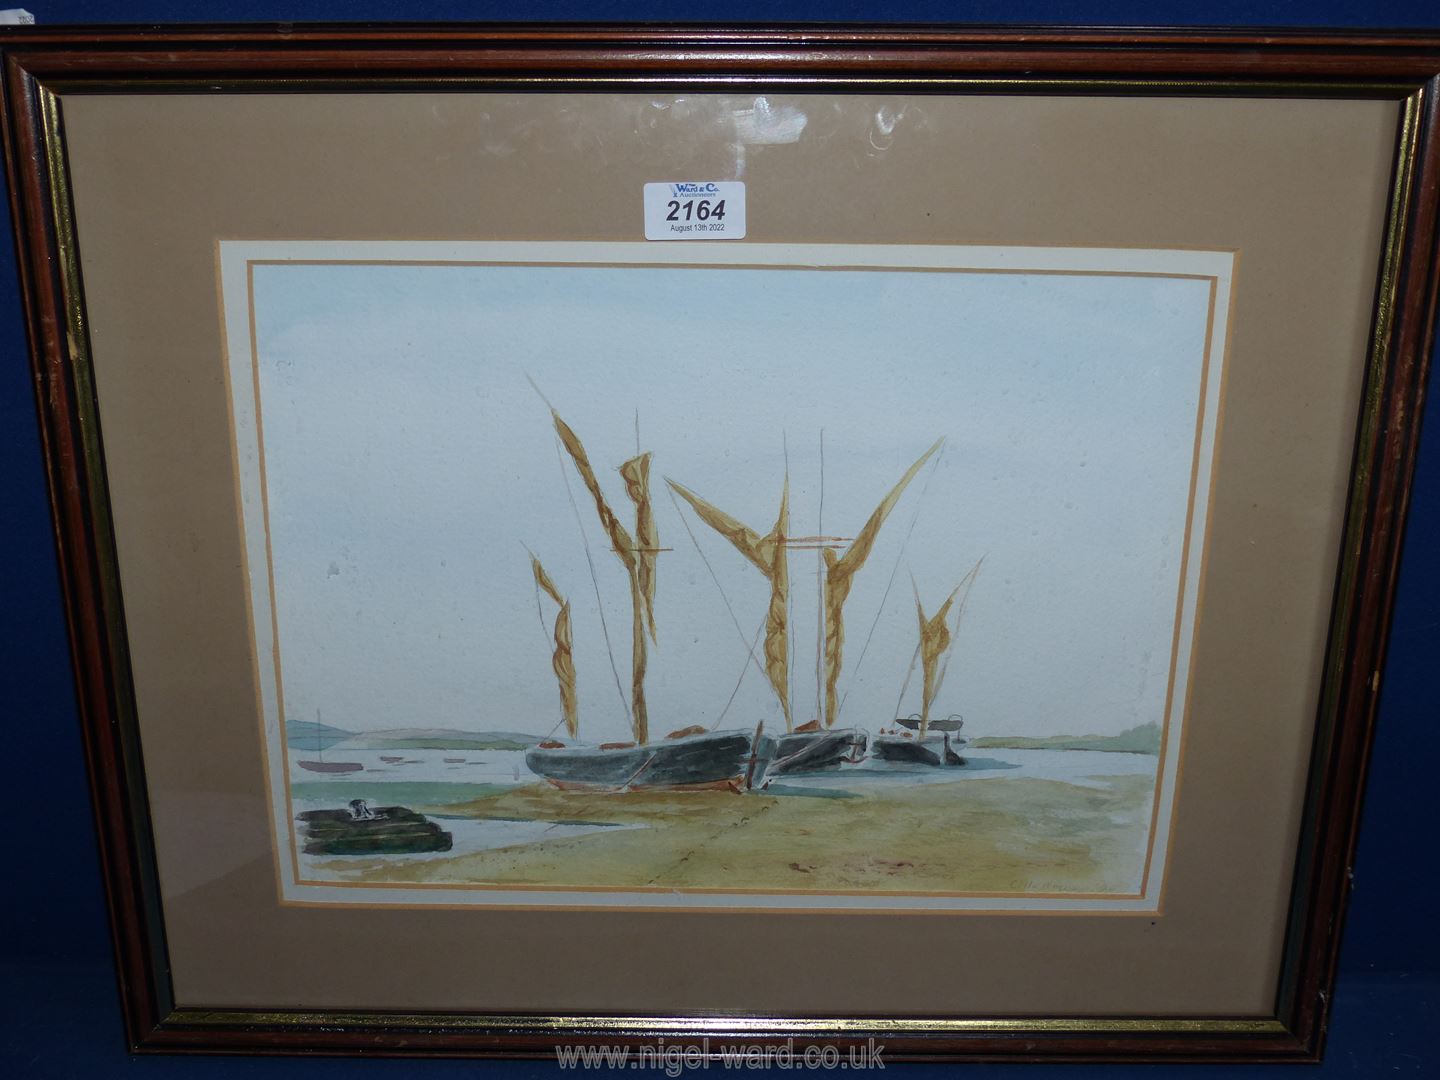 A framed and mounted watercolour depicting moored boats at low tide, signed lower right 'C. Heames'.